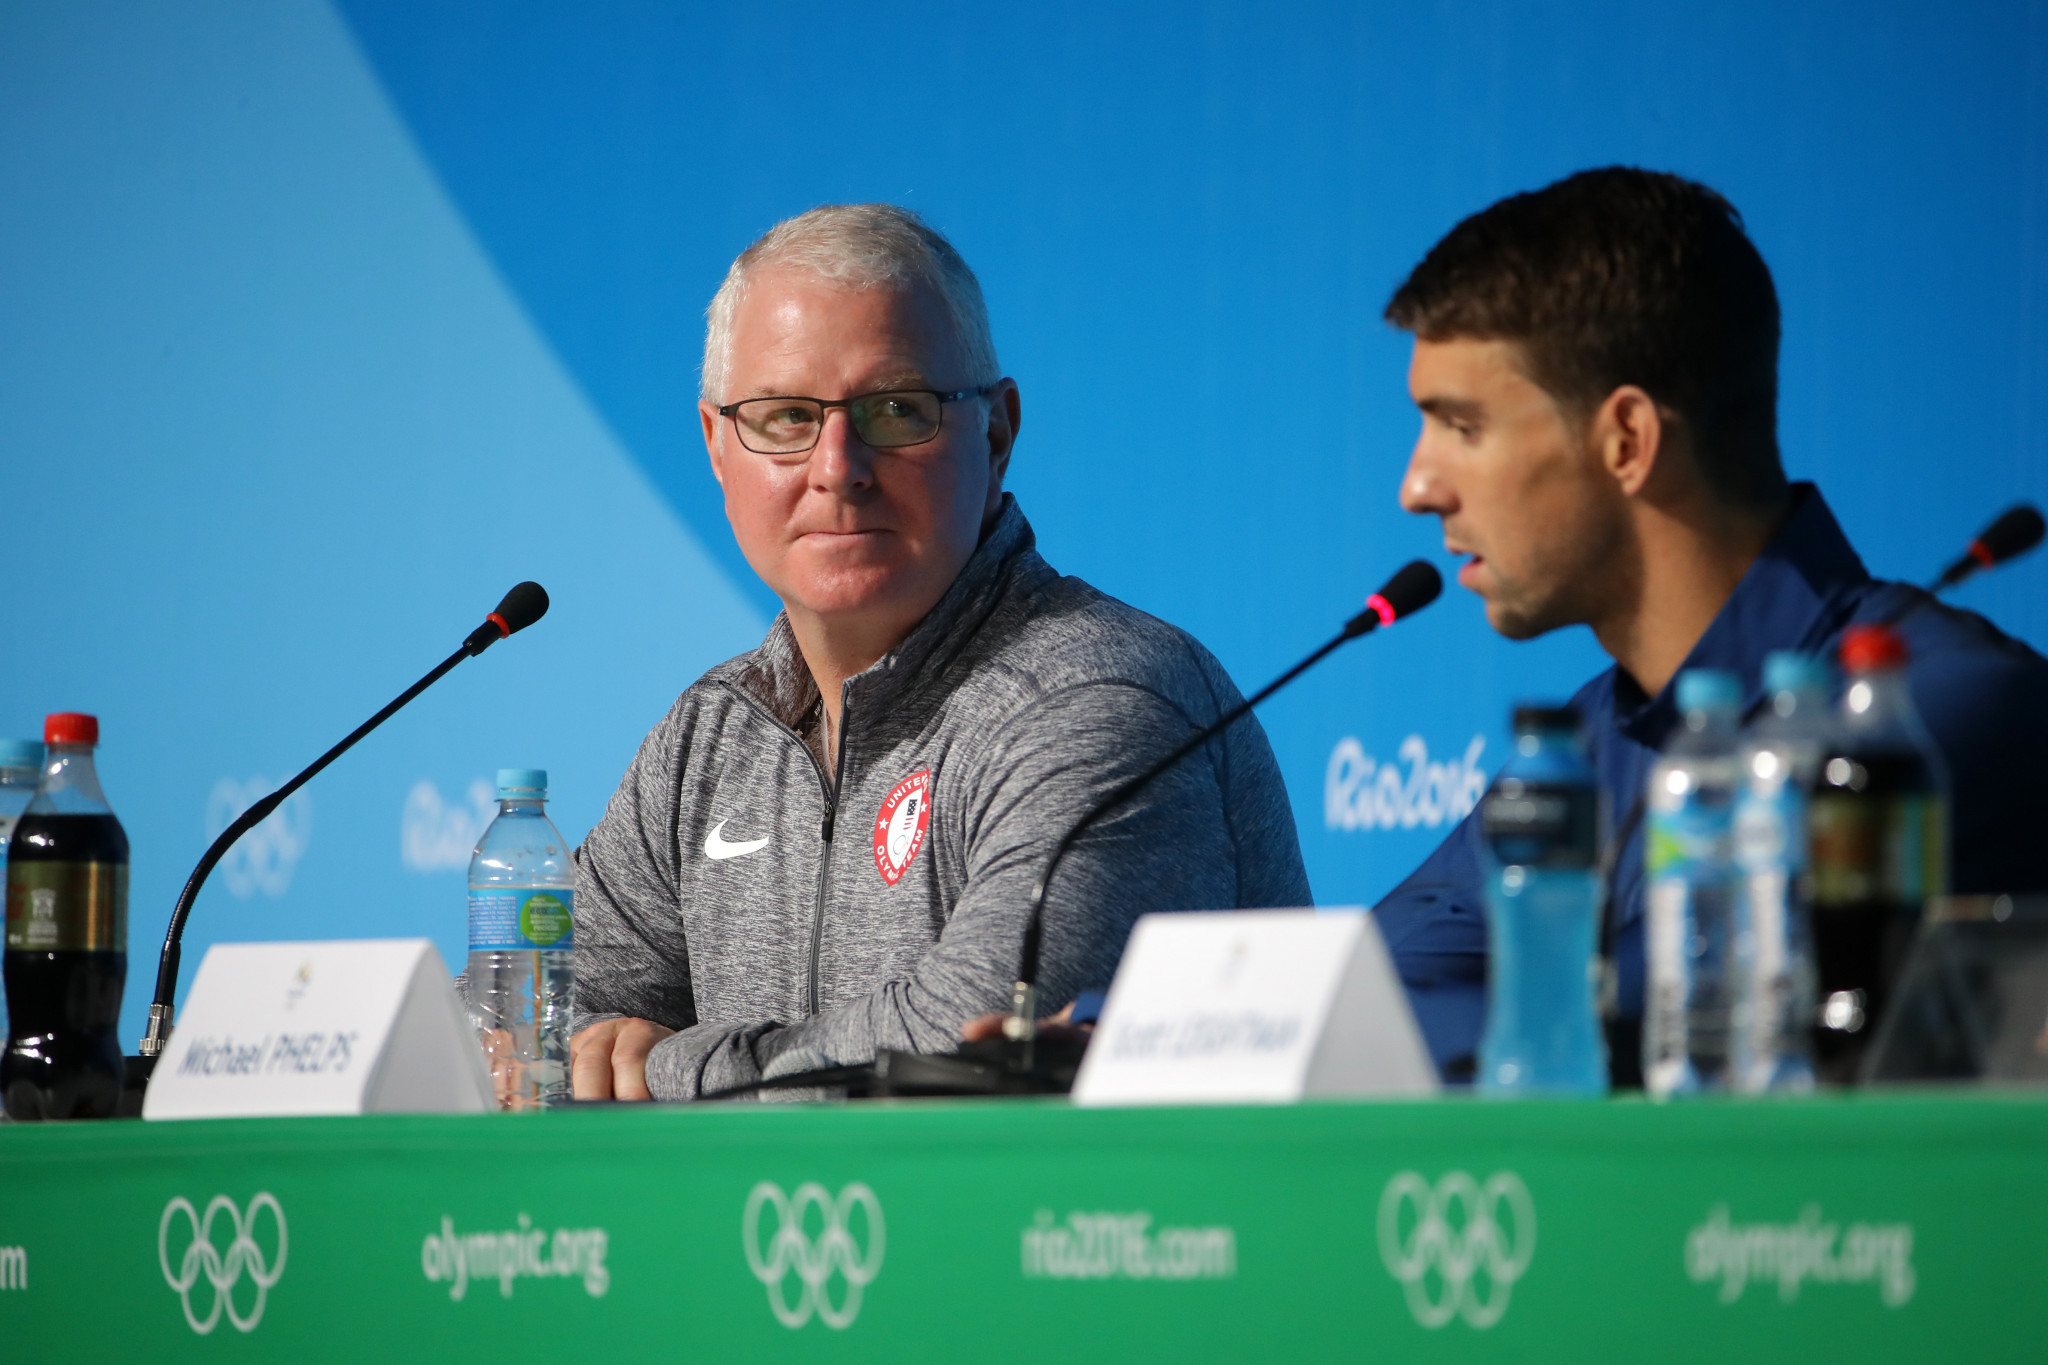 Bob Bowman famously coached Michael Phelps who is the most decorated Olympian with 28 medals ©Getty Images